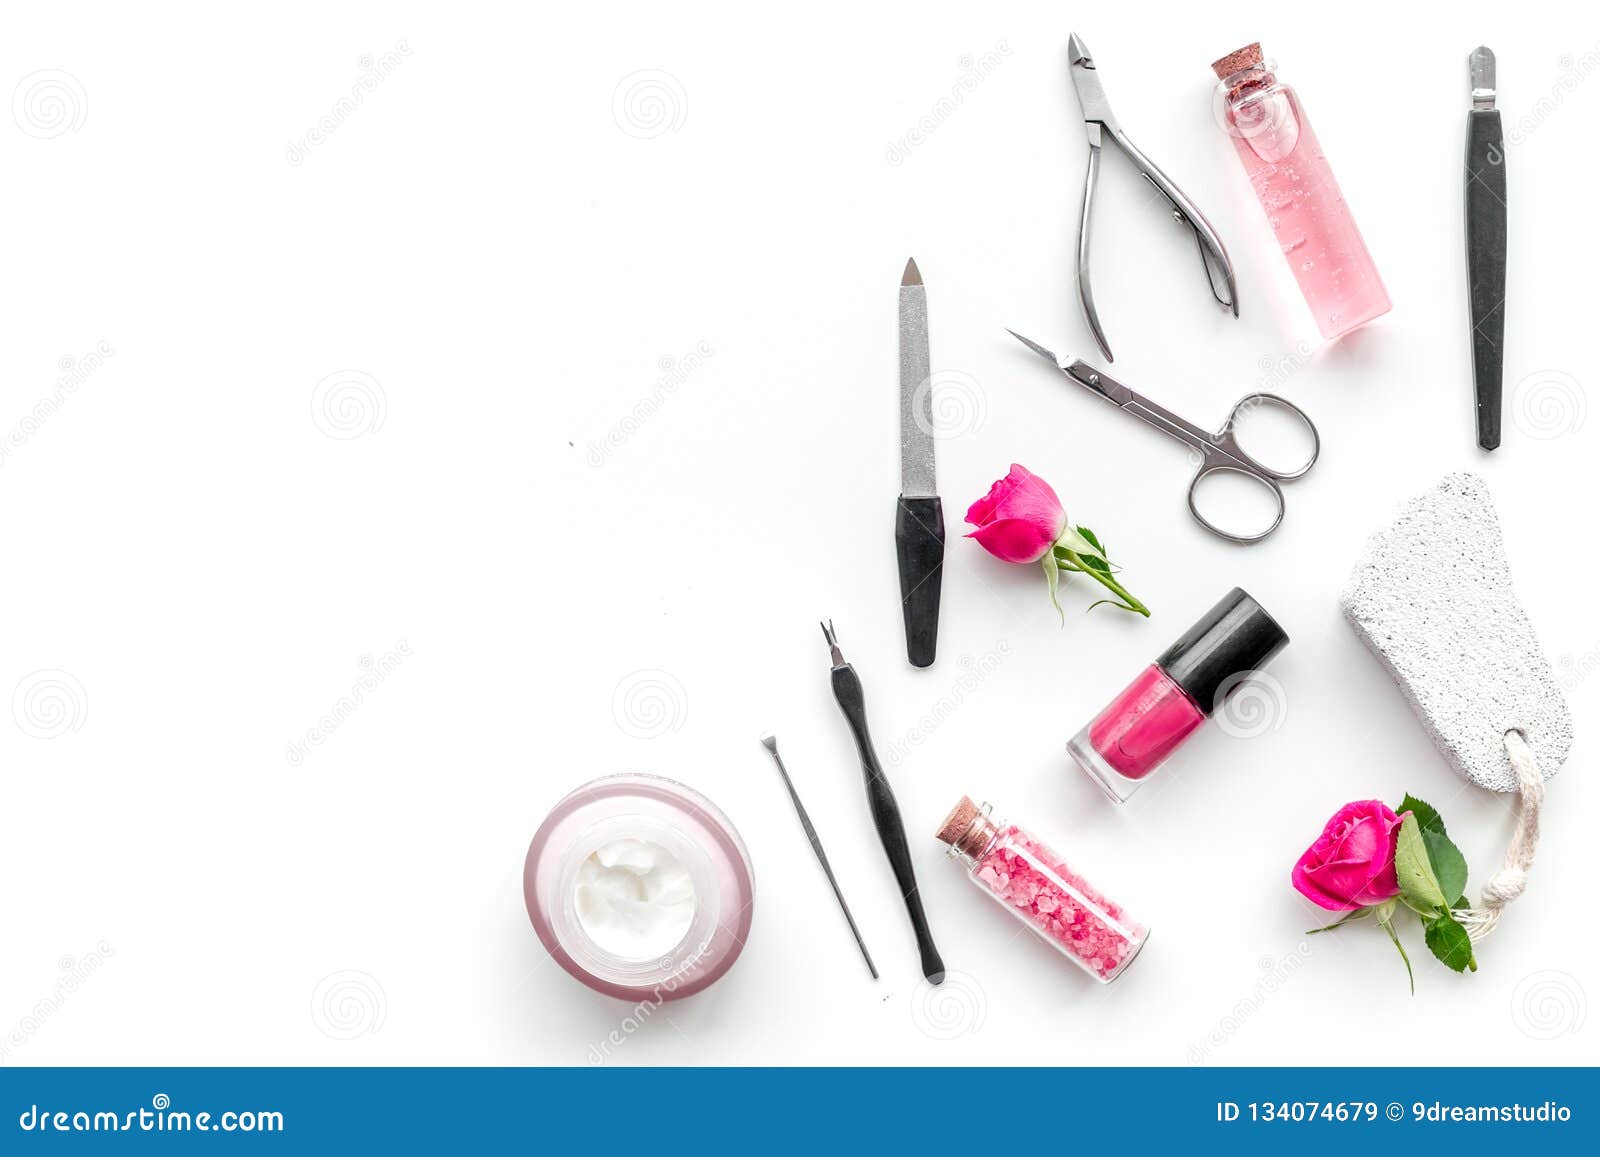 Download Manicure And Pedicure Equipment For Nail Bar Set On White Background Top View Mockup Stock Image Image Of Workspace Rose 134074679